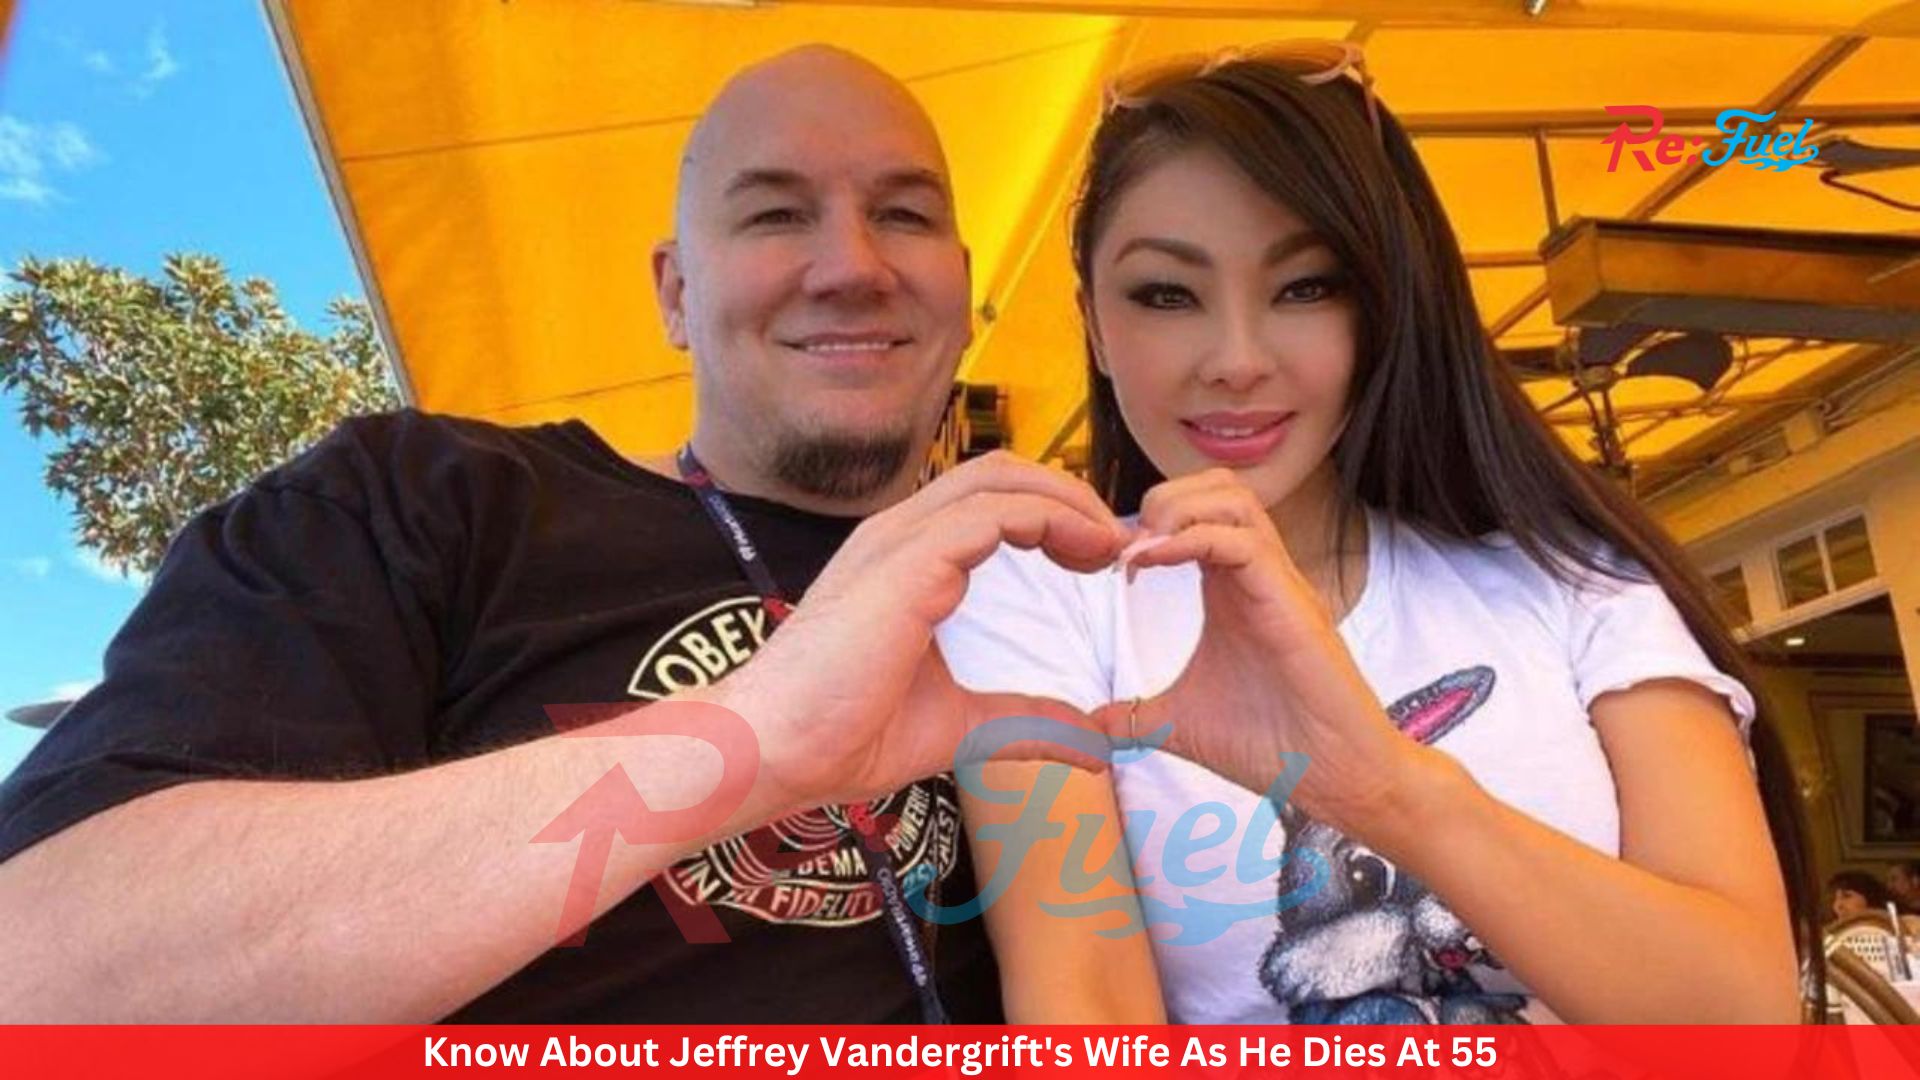 Know About Jeffrey Vandergrift's Wife As He Dies At 55